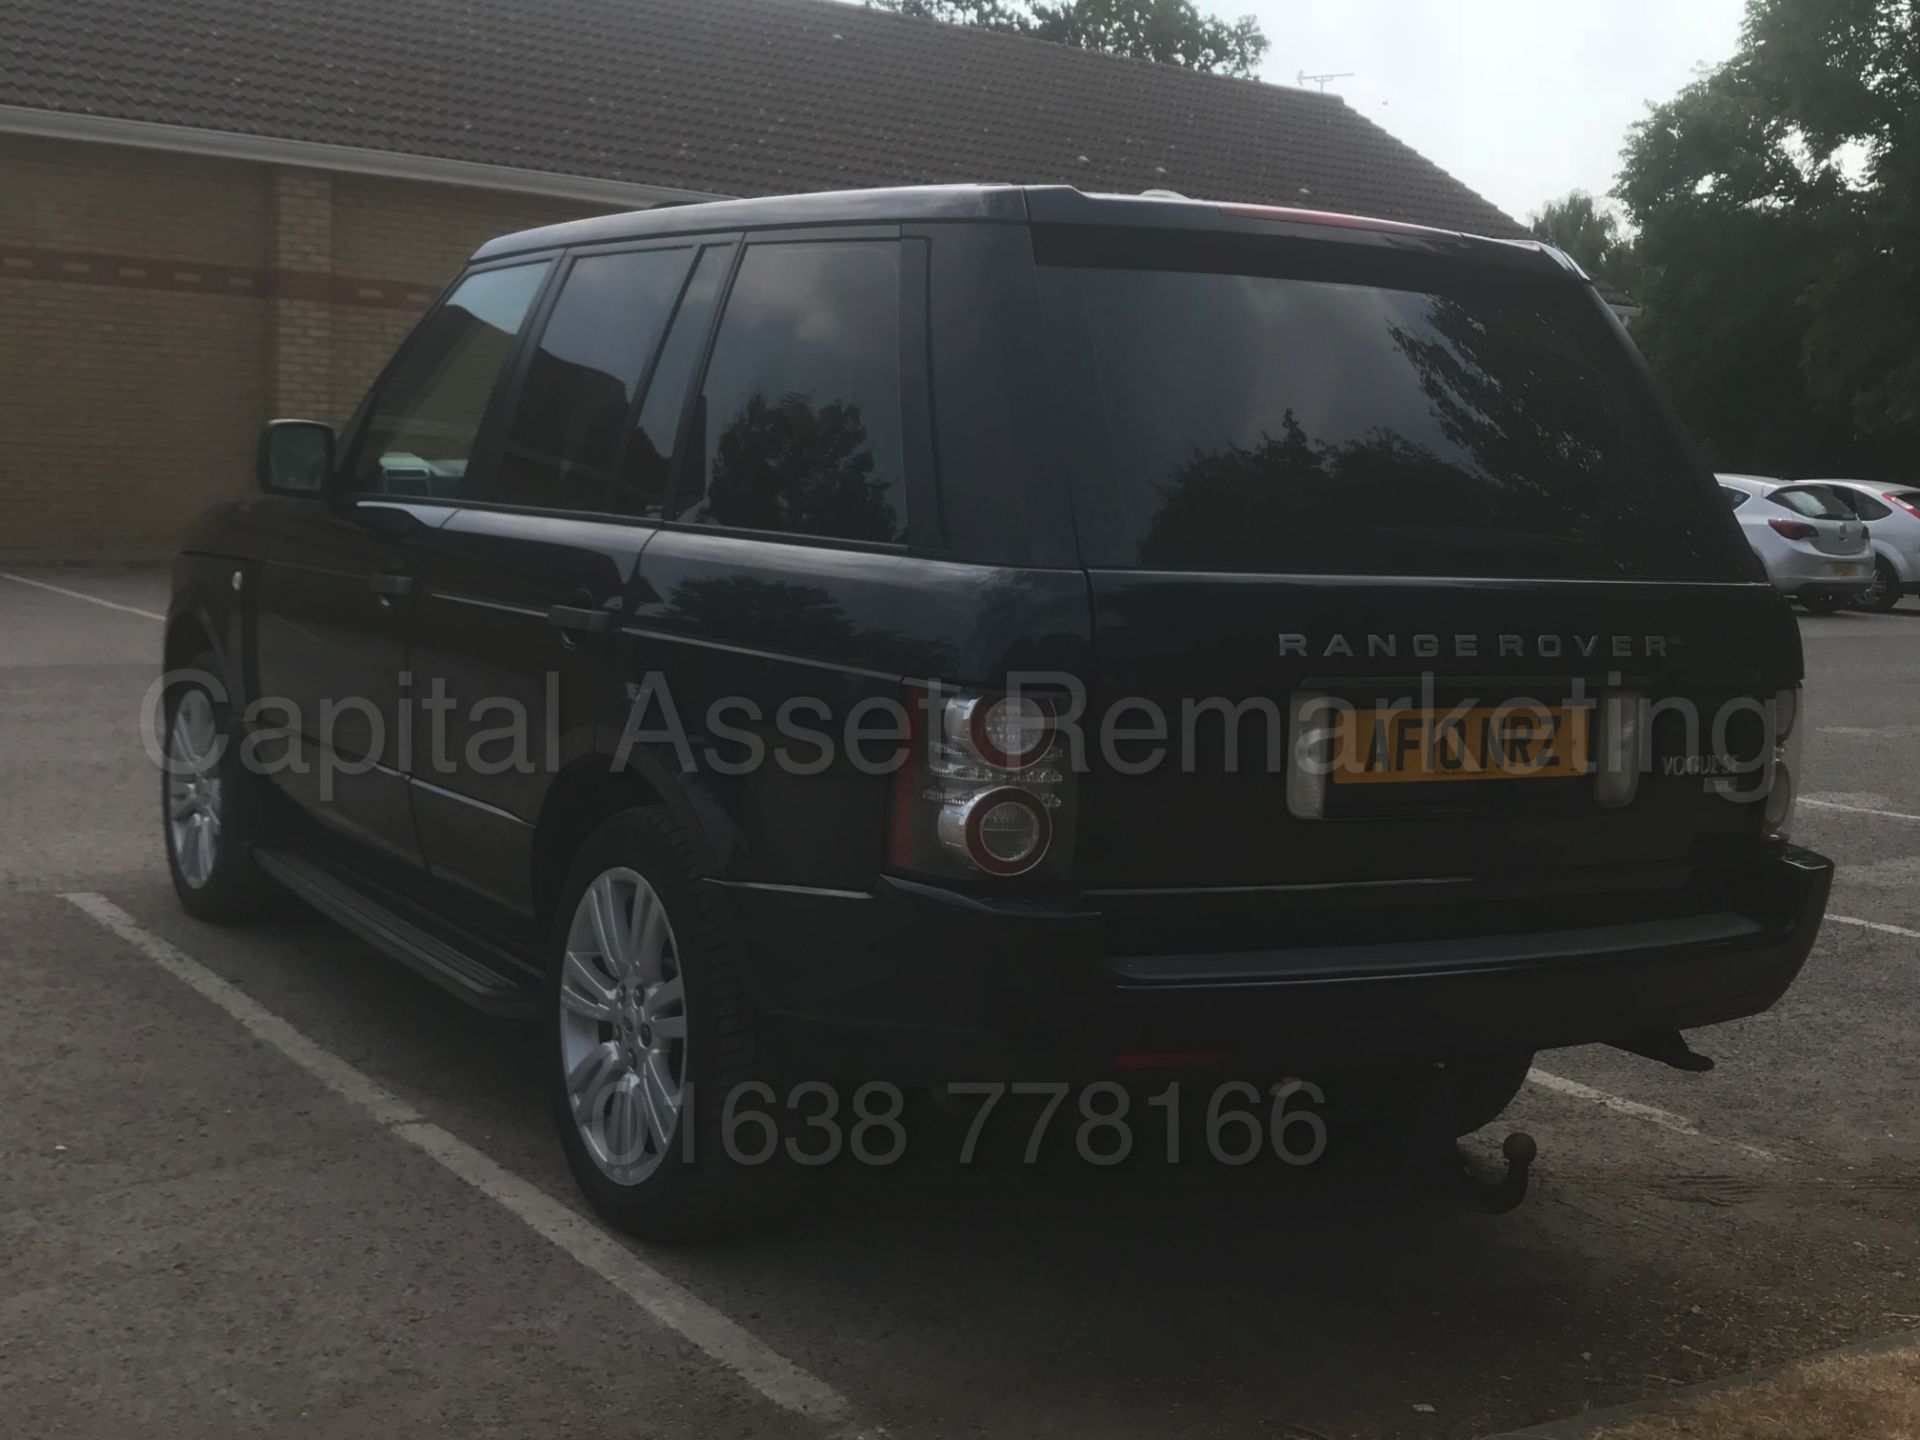 (On Sale) RANGE ROVER VOGUE **SE EDITION** (2010 - FACELIFT EDITION) 'TDV8 - 268 BHP - AUTO' **WOW** - Image 9 of 62